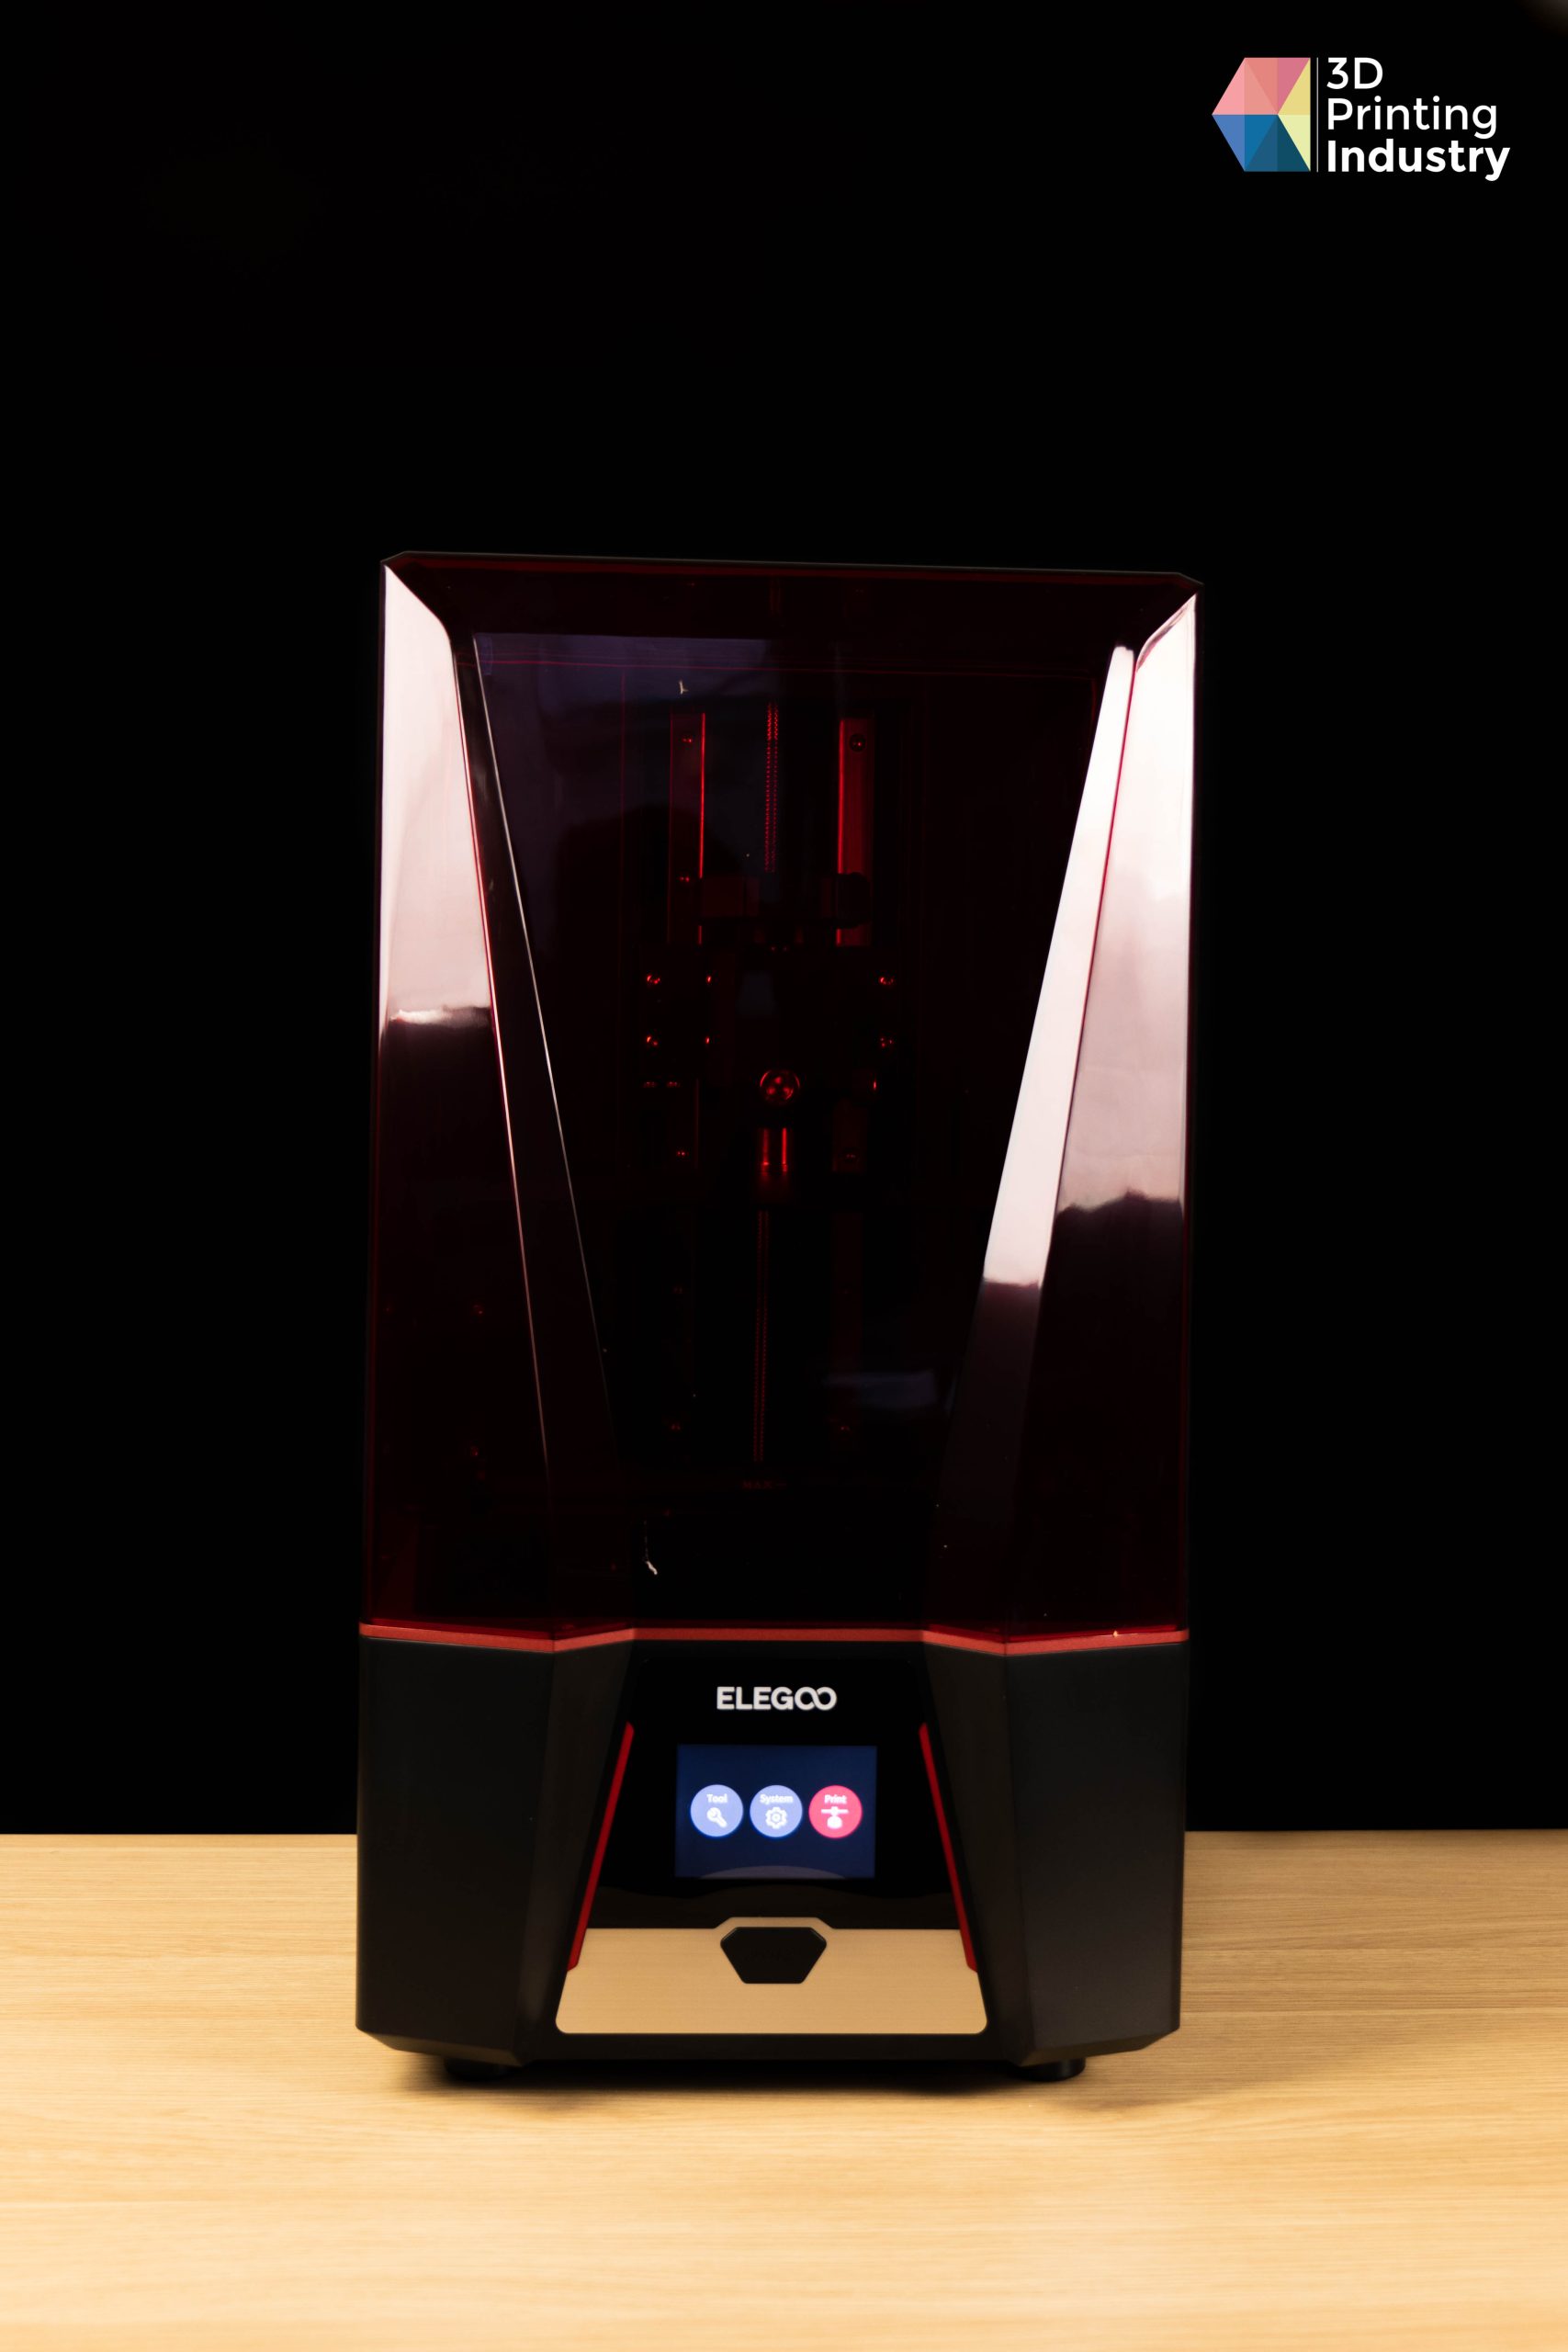 REVIEW: The Elegoo Saturn 2, a new 8K resin 3D printer with a Mono